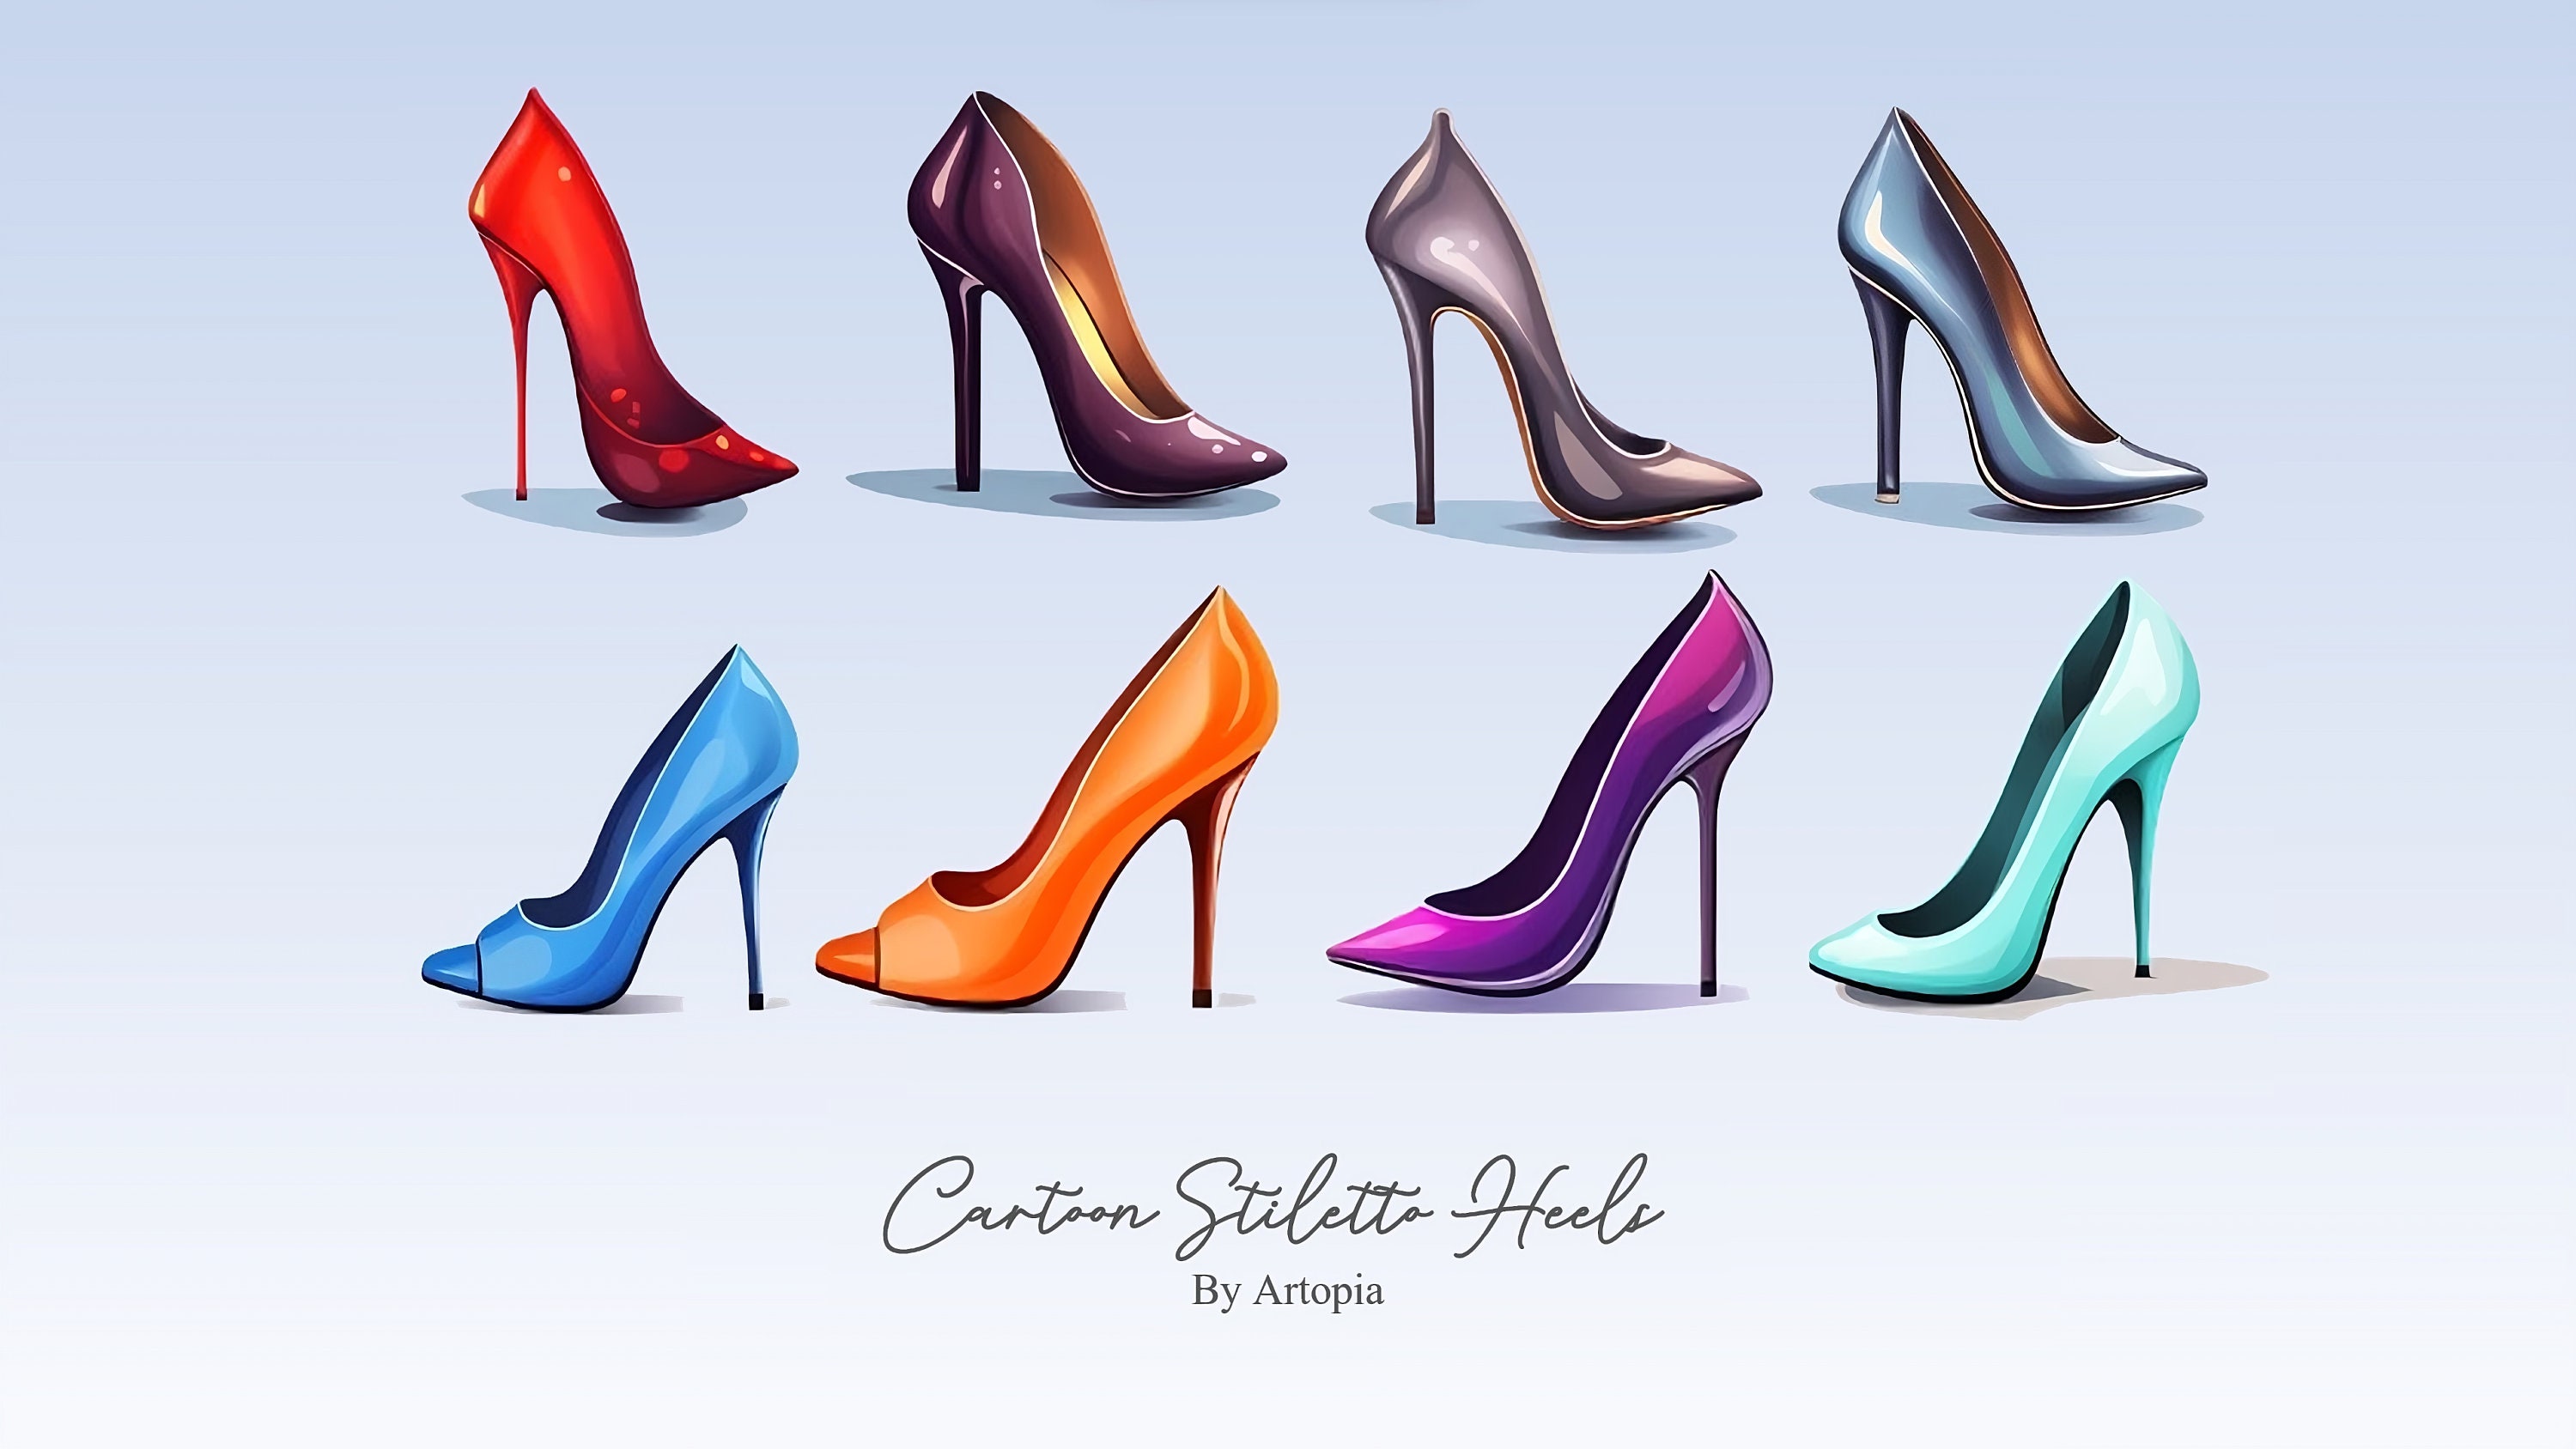 alex veloz recommends cartoon high heel shoes pic